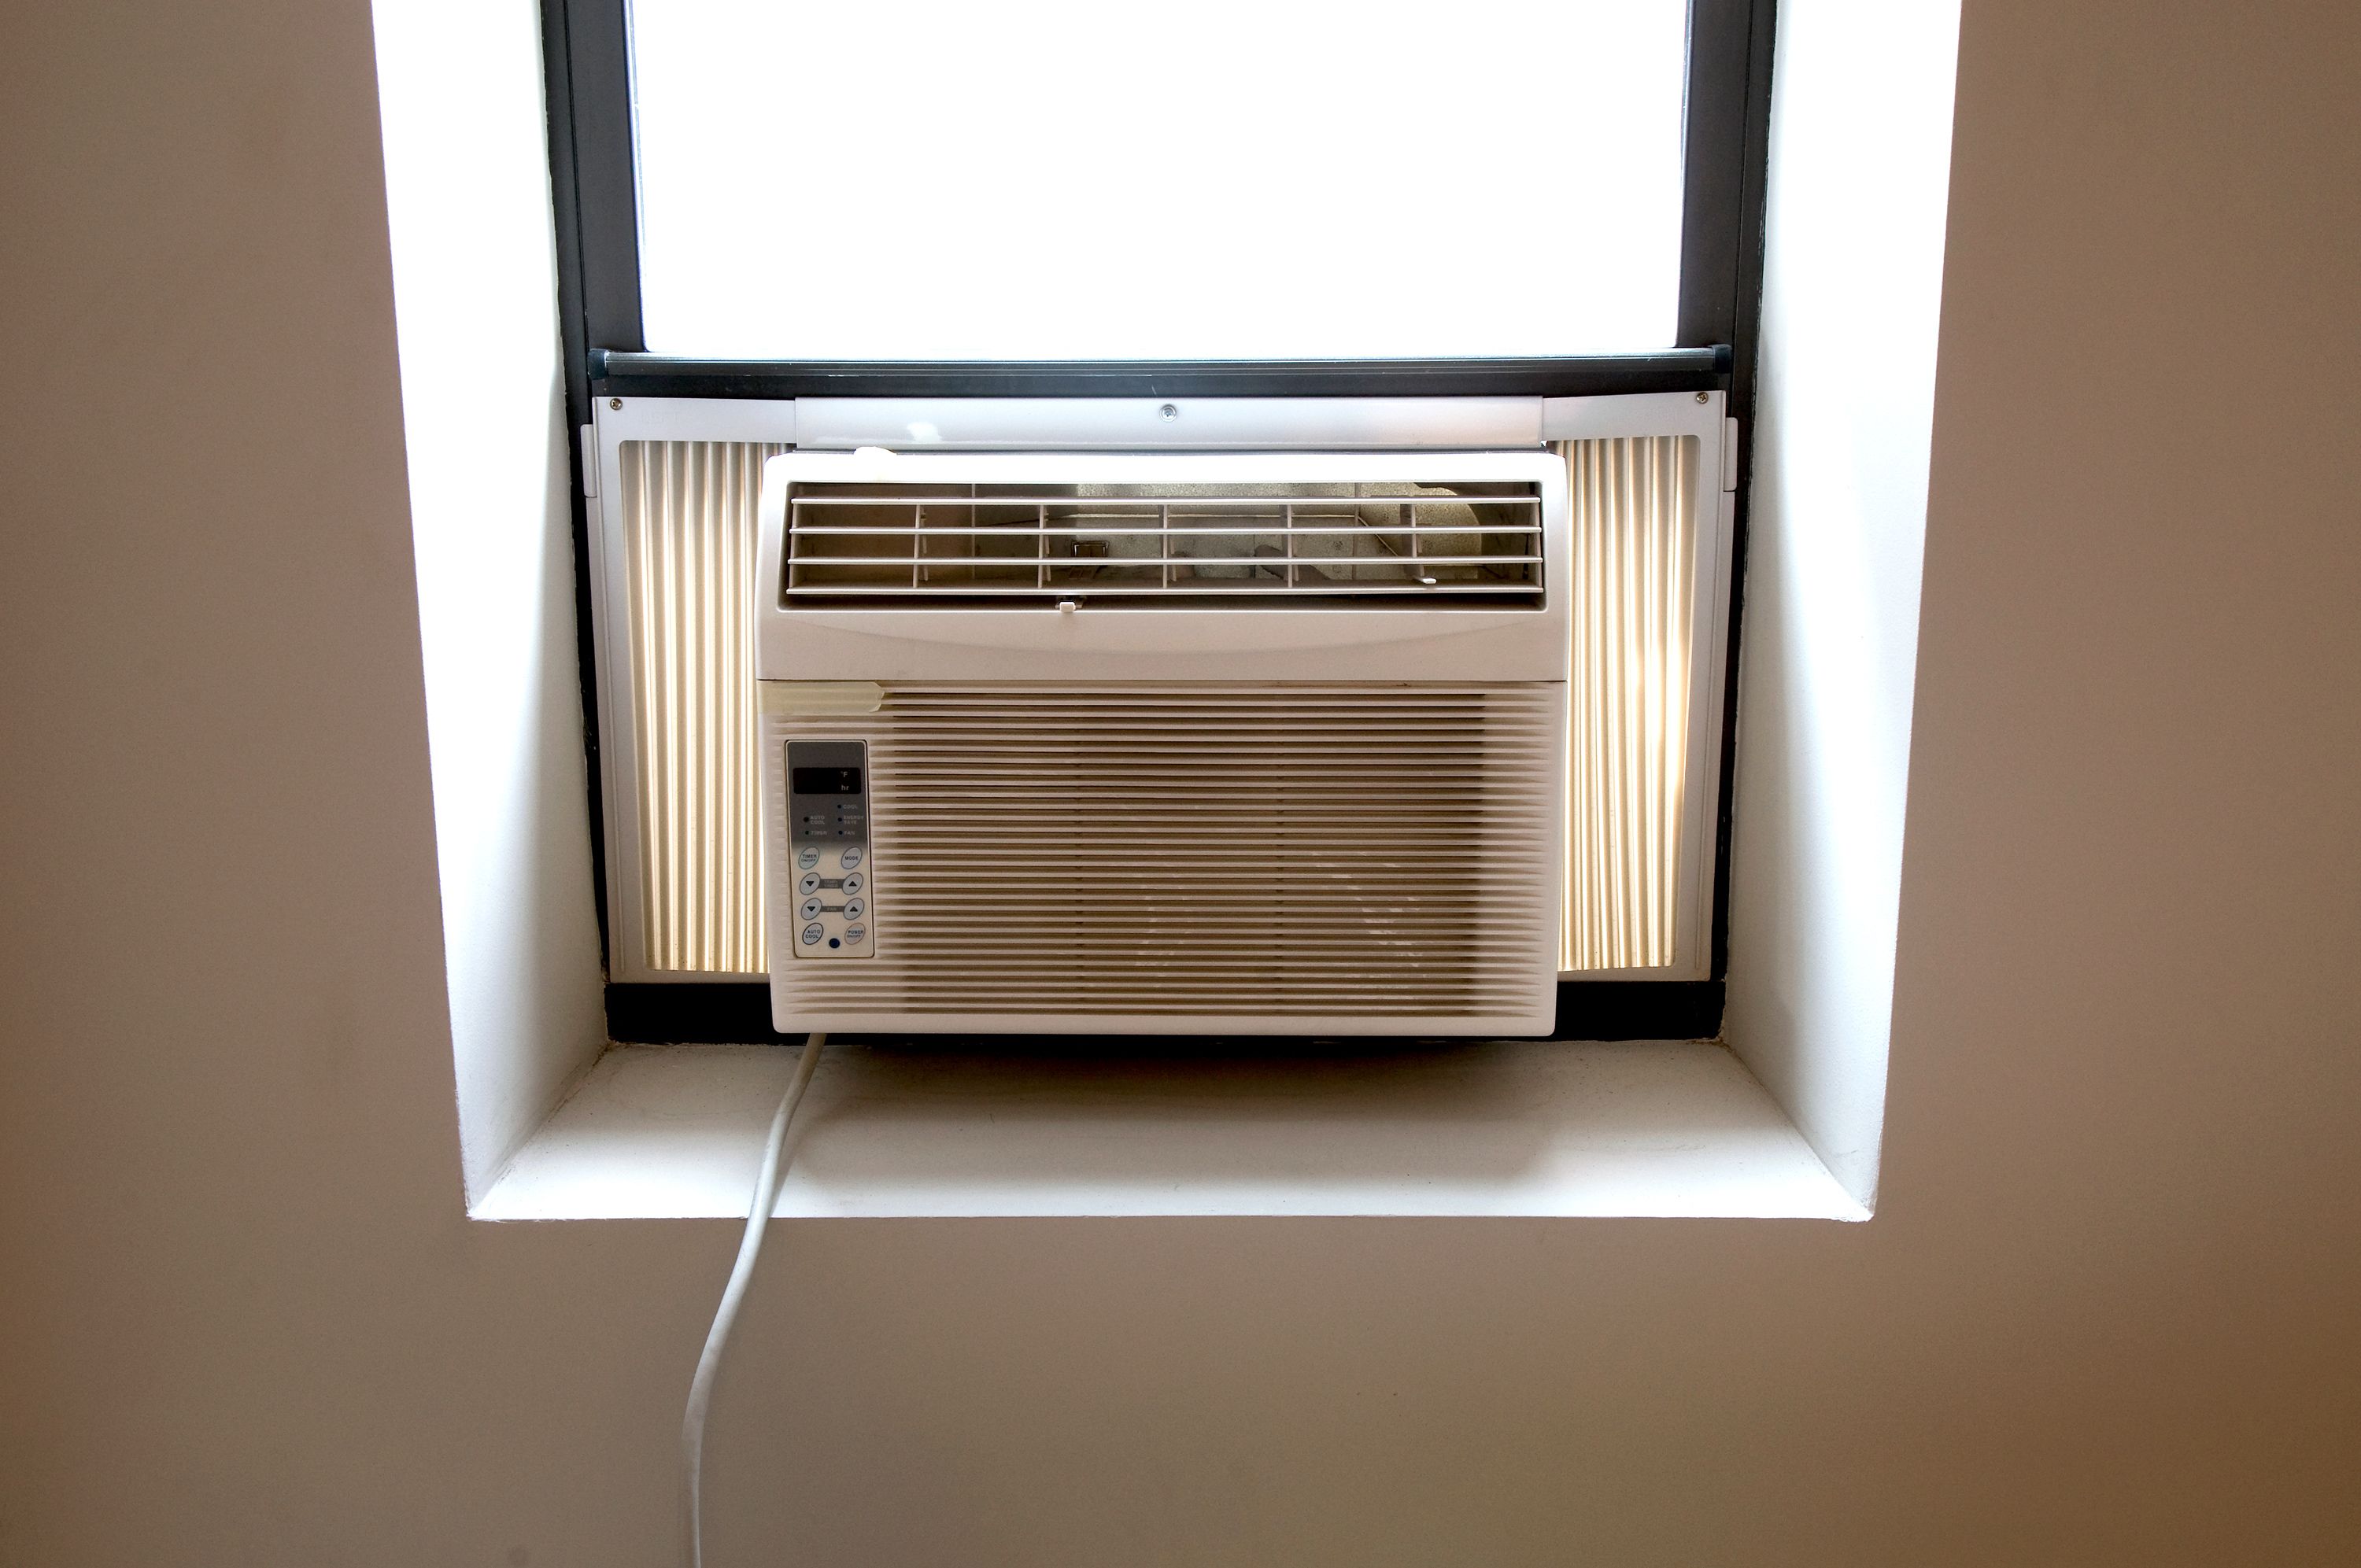 How To Install a Window AC Unit